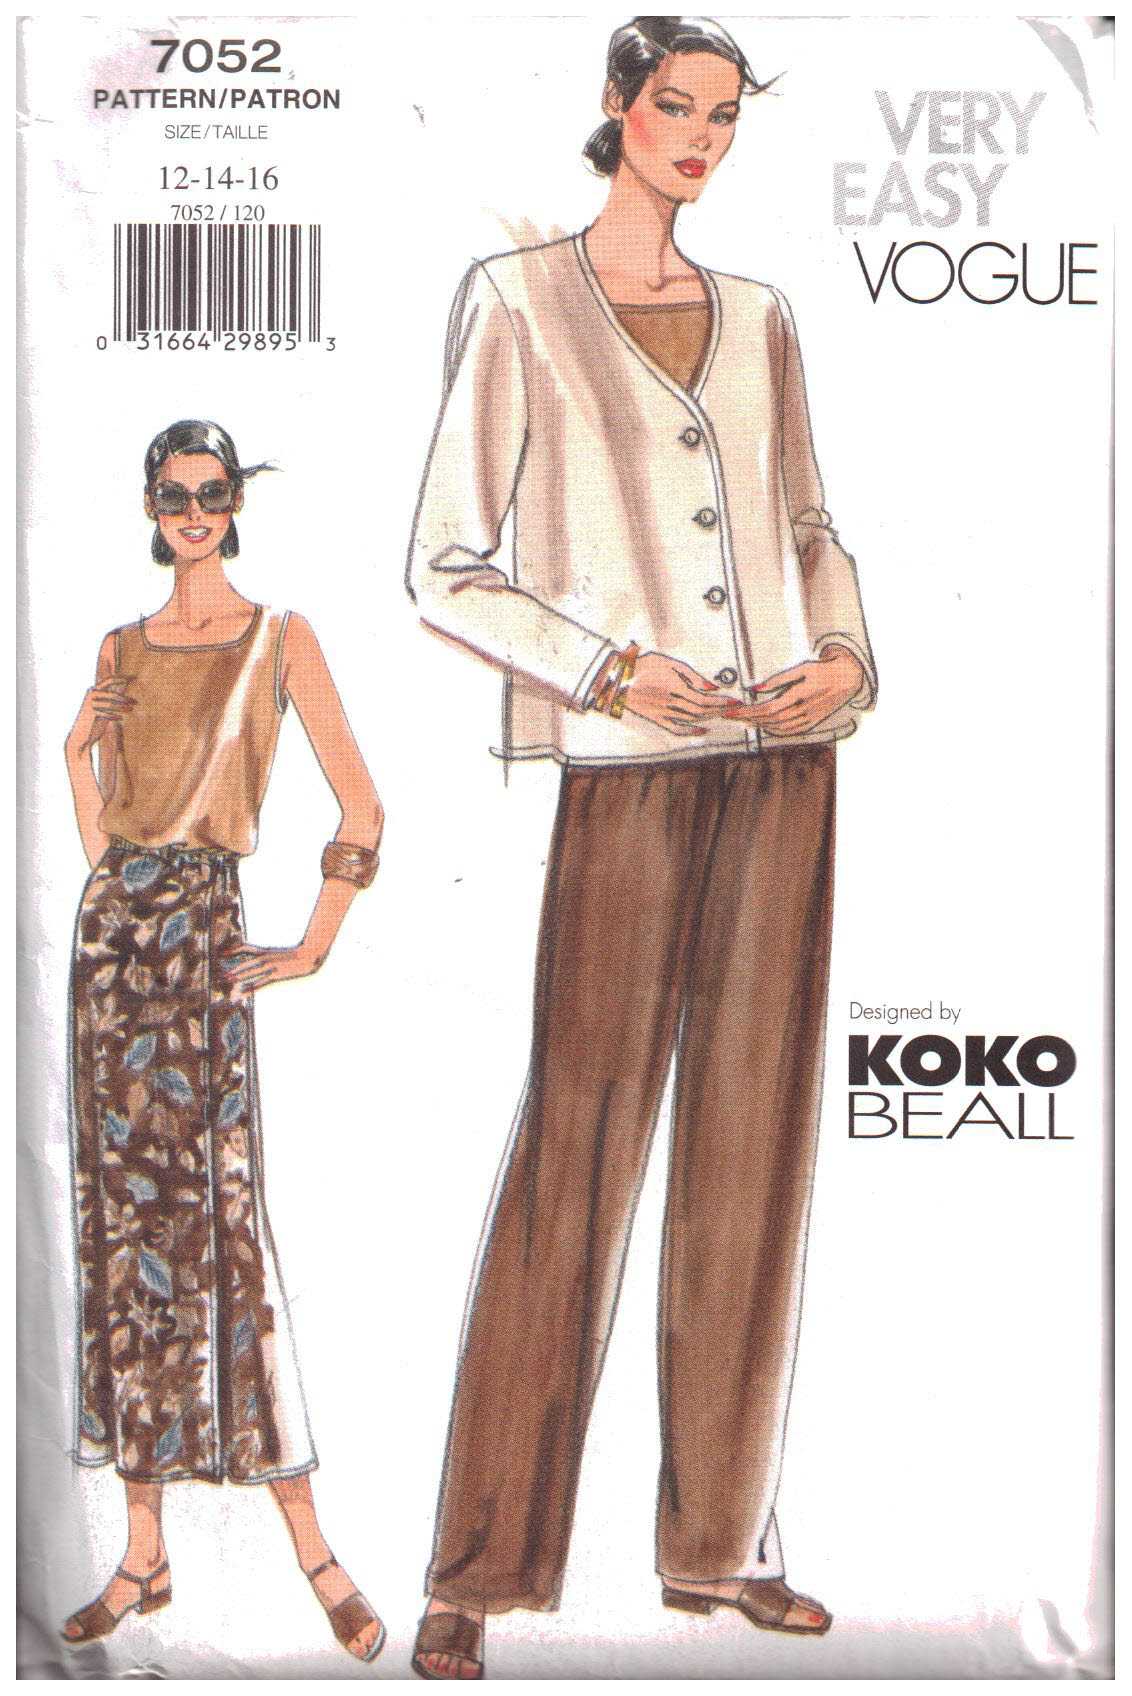 Vogue 7052 Jacket, Top, Skirt, Pants by Koko Beall Size: 12-14-16 or 6 ...